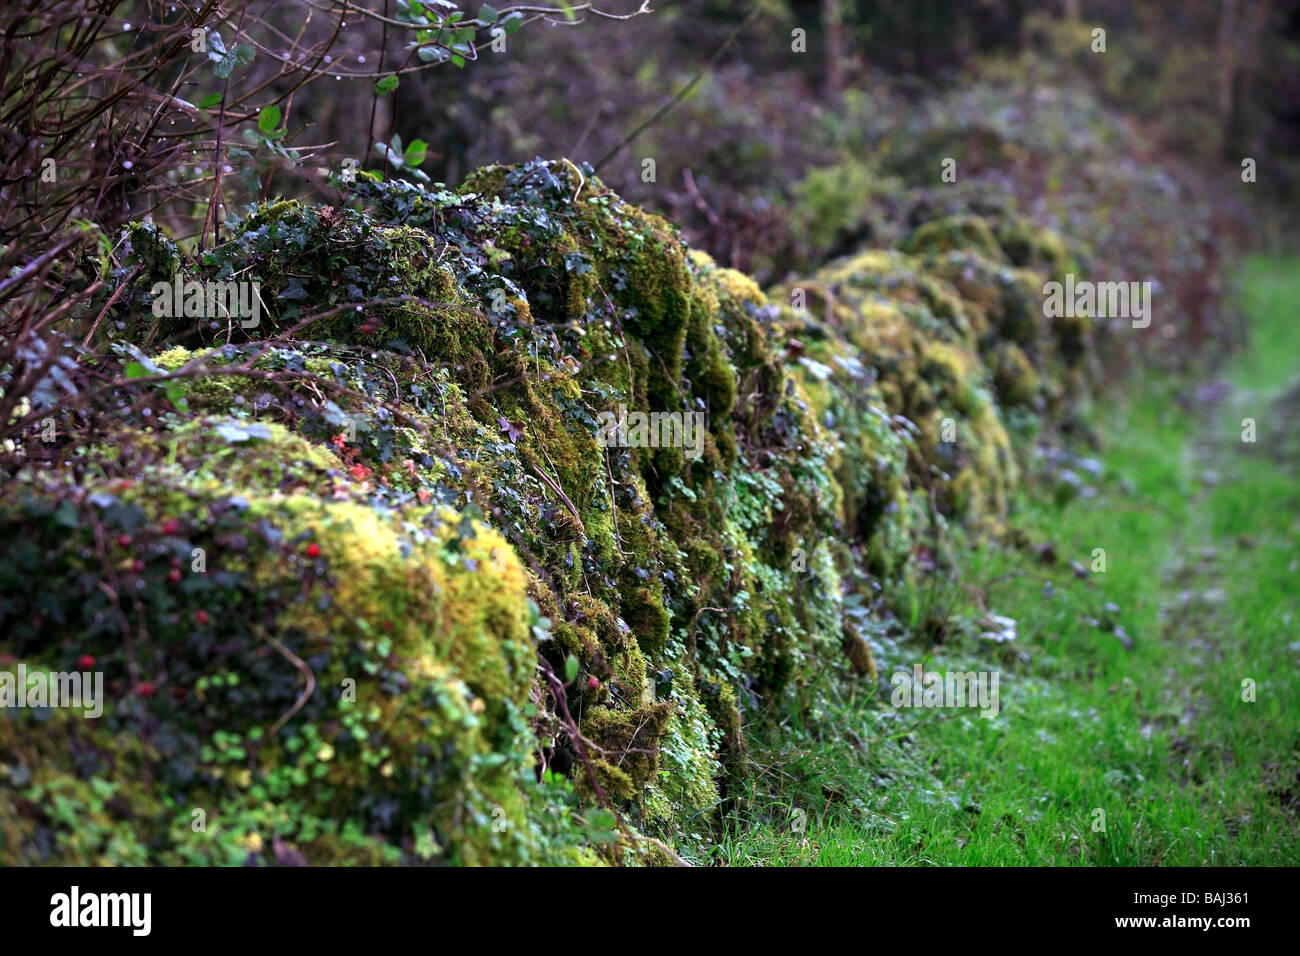 Stone Walls covered in Moss and Vegetation Ireland Stock Photo